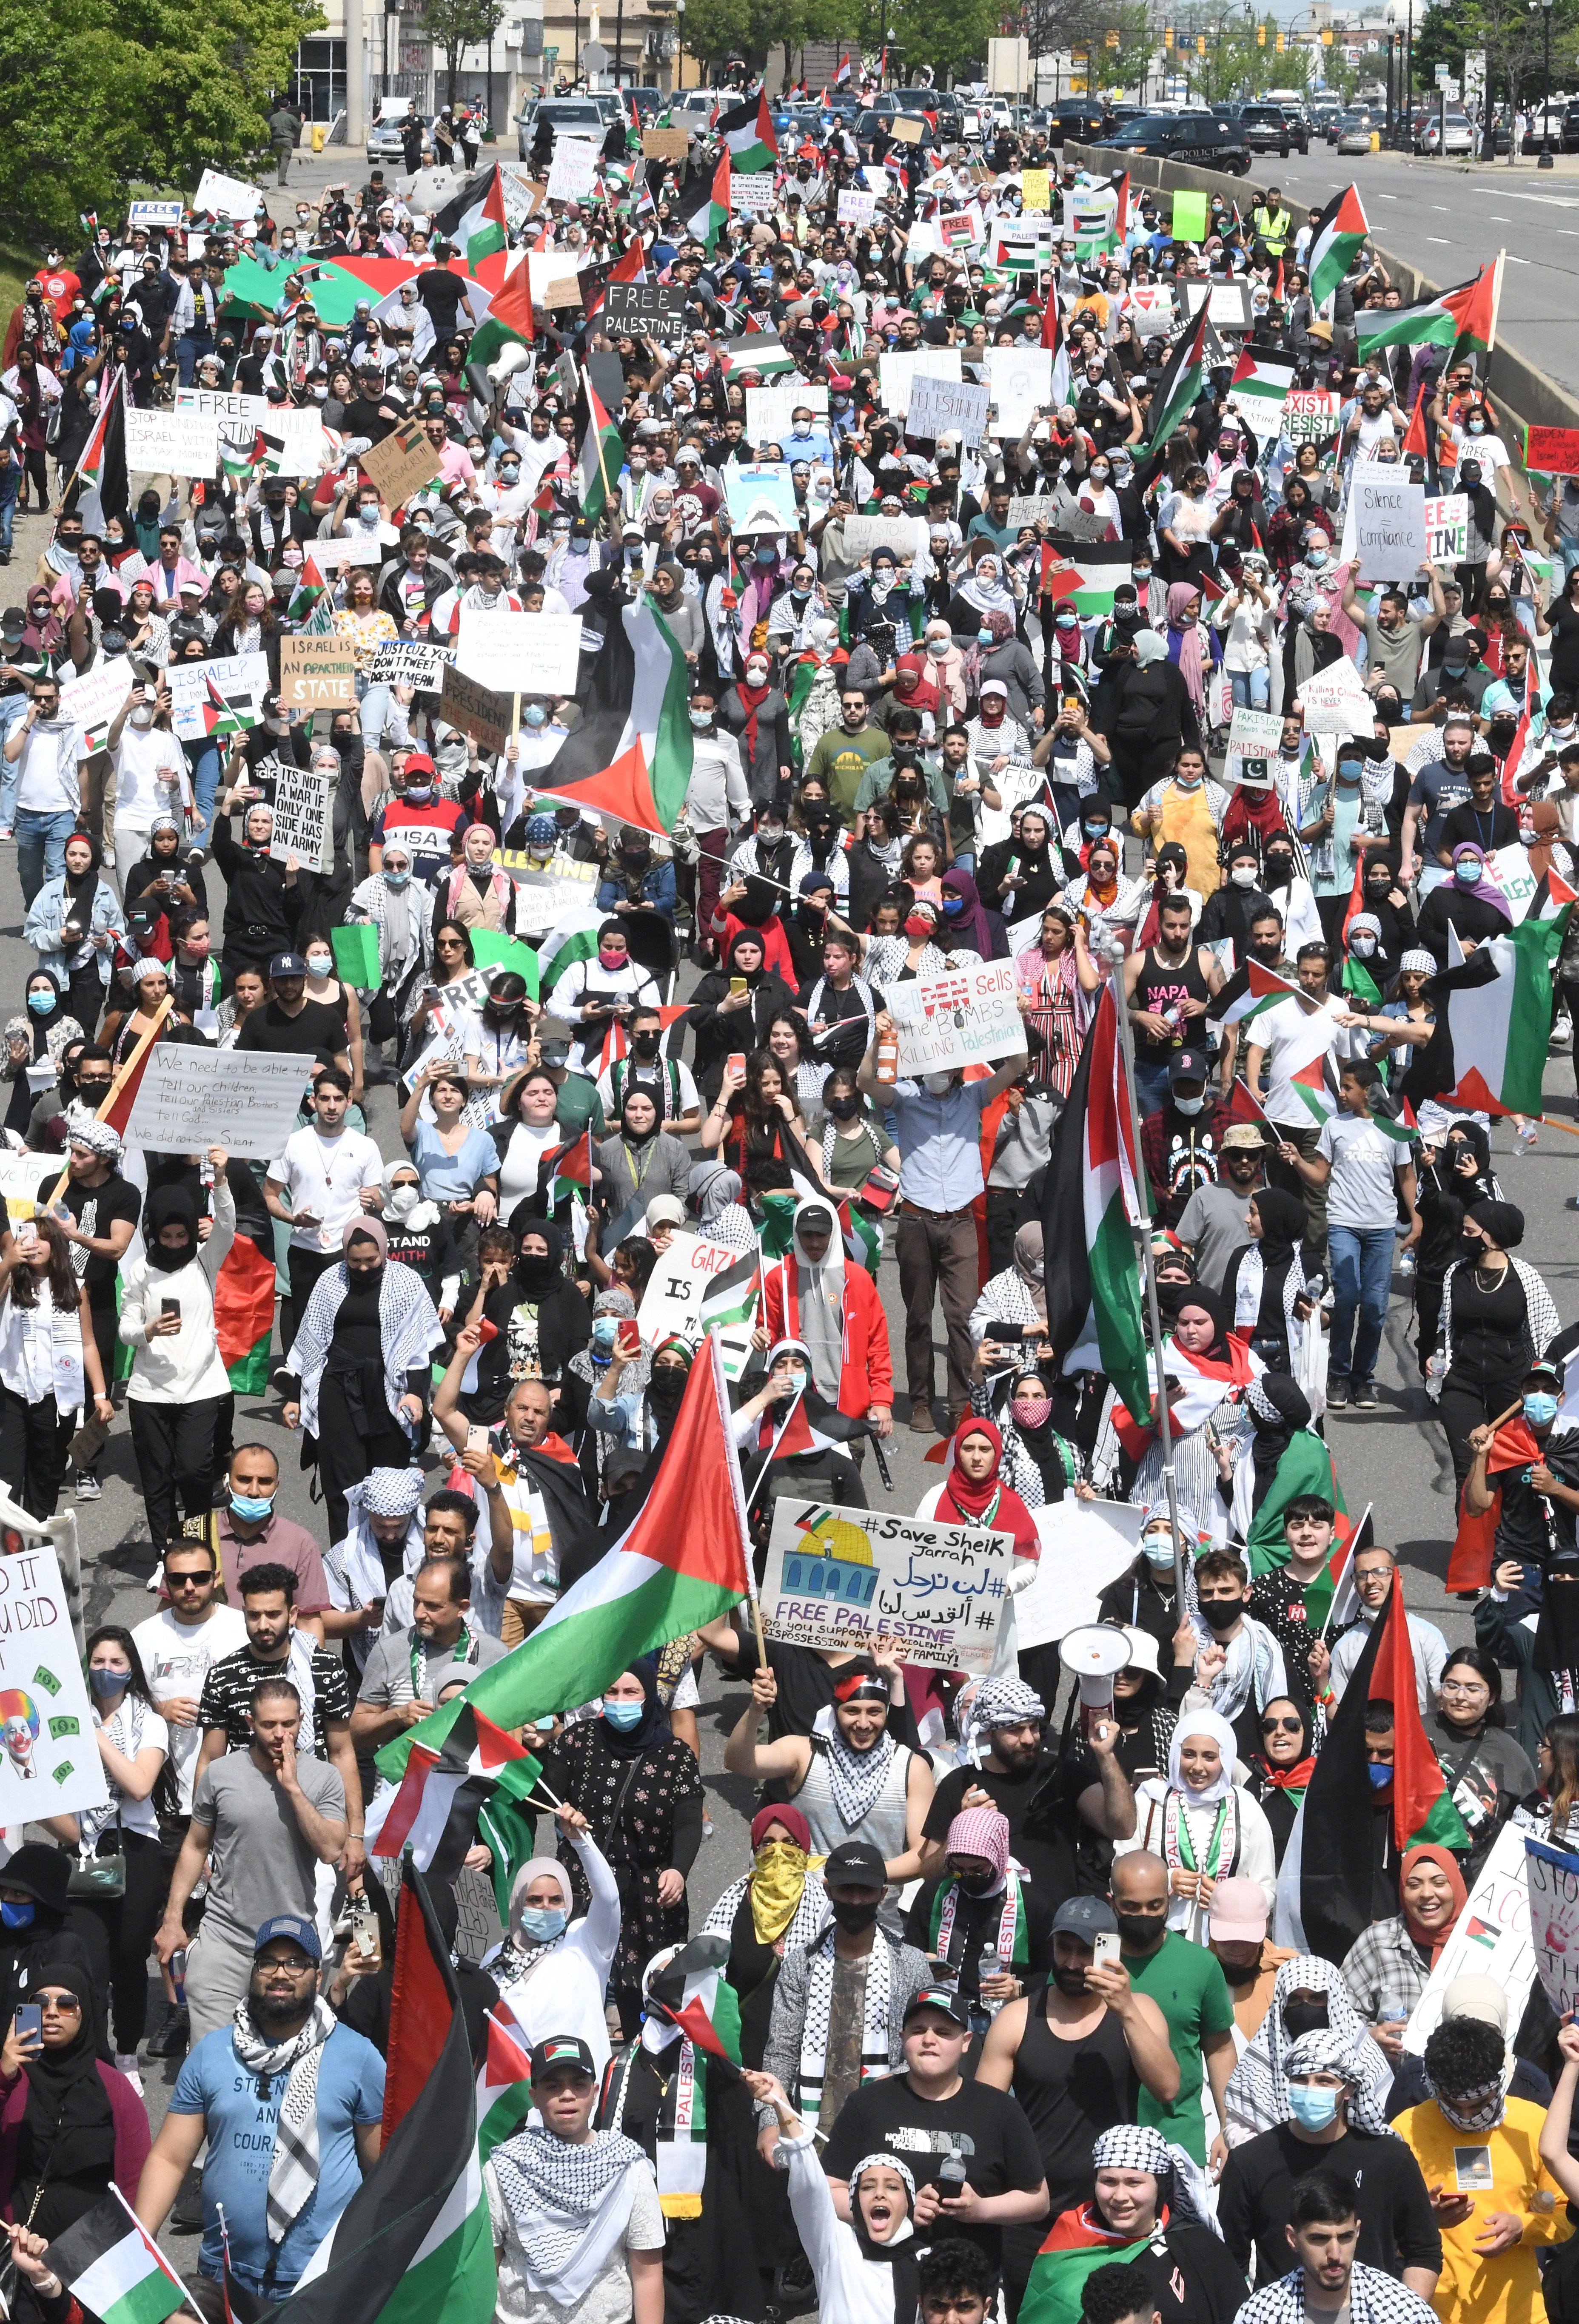 Thousands of Palestinian supporters march down westbound Michigan Avenue during a Palestinian protest and march, at the same time President Joe Biden is visiting in another part of Dearborn, Michigan on May 18, 2021.